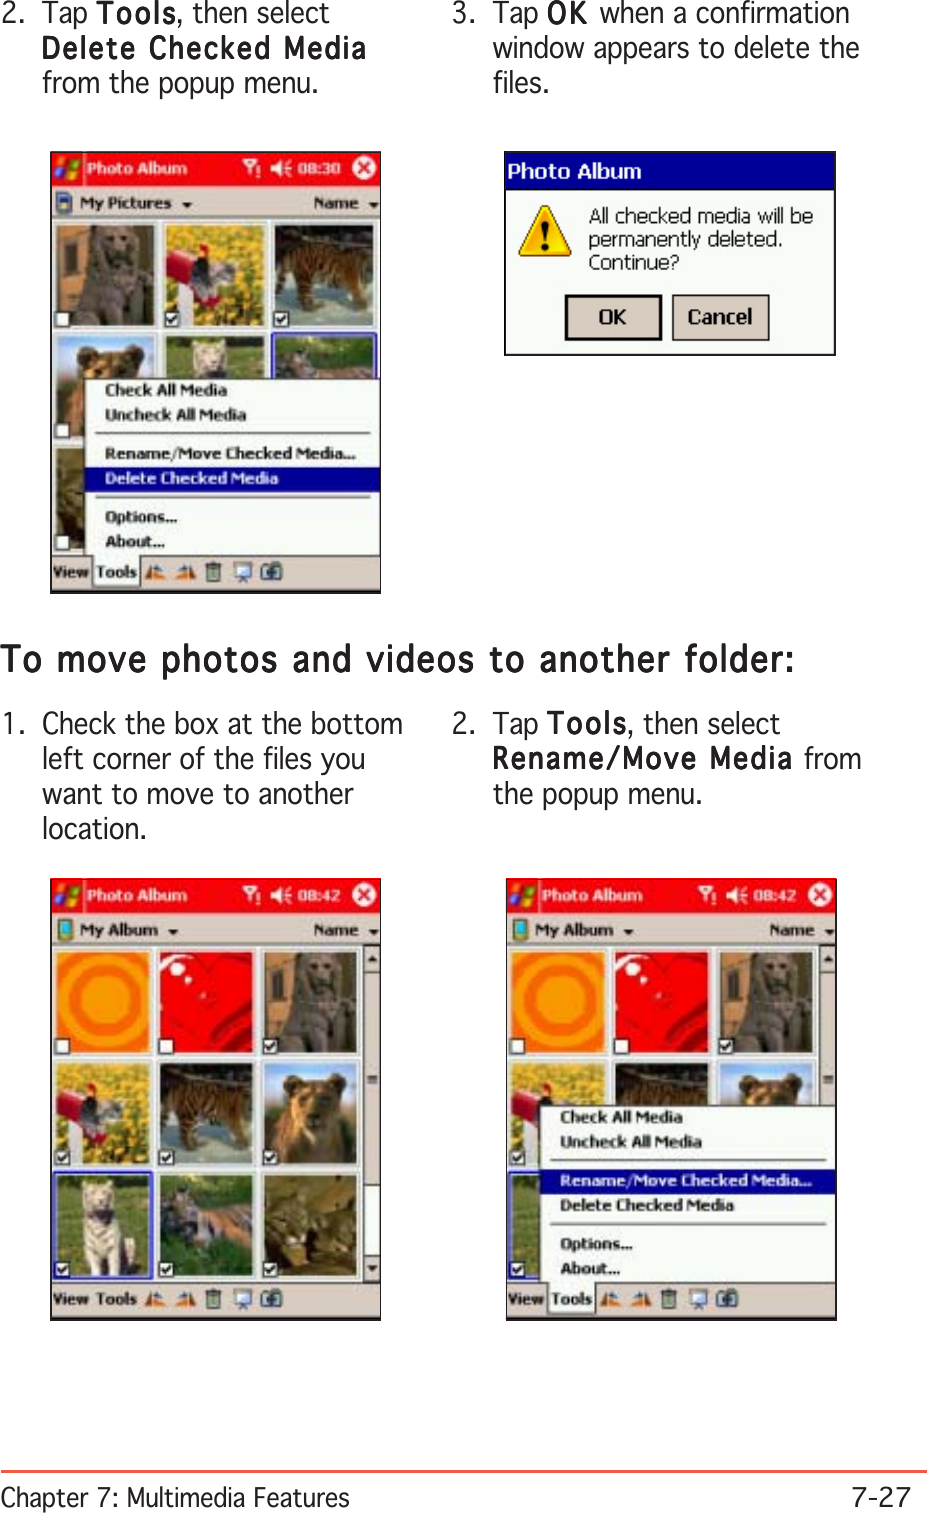 Chapter 7: Multimedia Features7-272. Tap ToolsToolsToolsToolsTo ols, then selectDelete Checked MediaDelete Checked MediaDelete Checked MediaDelete Checked MediaDelete Checked Mediafrom the popup menu.3. Tap OKOKOKOKO K  when a confirmationwindow appears to delete thefiles.2. Tap ToolsToolsToolsToolsTo ols, then selectRename/Move Media Rename/Move Media Rename/Move Media Rename/Move Media Rename/Move Media fromthe popup menu.1. Check the box at the bottomleft corner of the files youwant to move to anotherlocation.To move photos and videos to another folder:To move photos and videos to another folder:To move photos and videos to another folder:To move photos and videos to another folder:To move photos and videos to another folder: